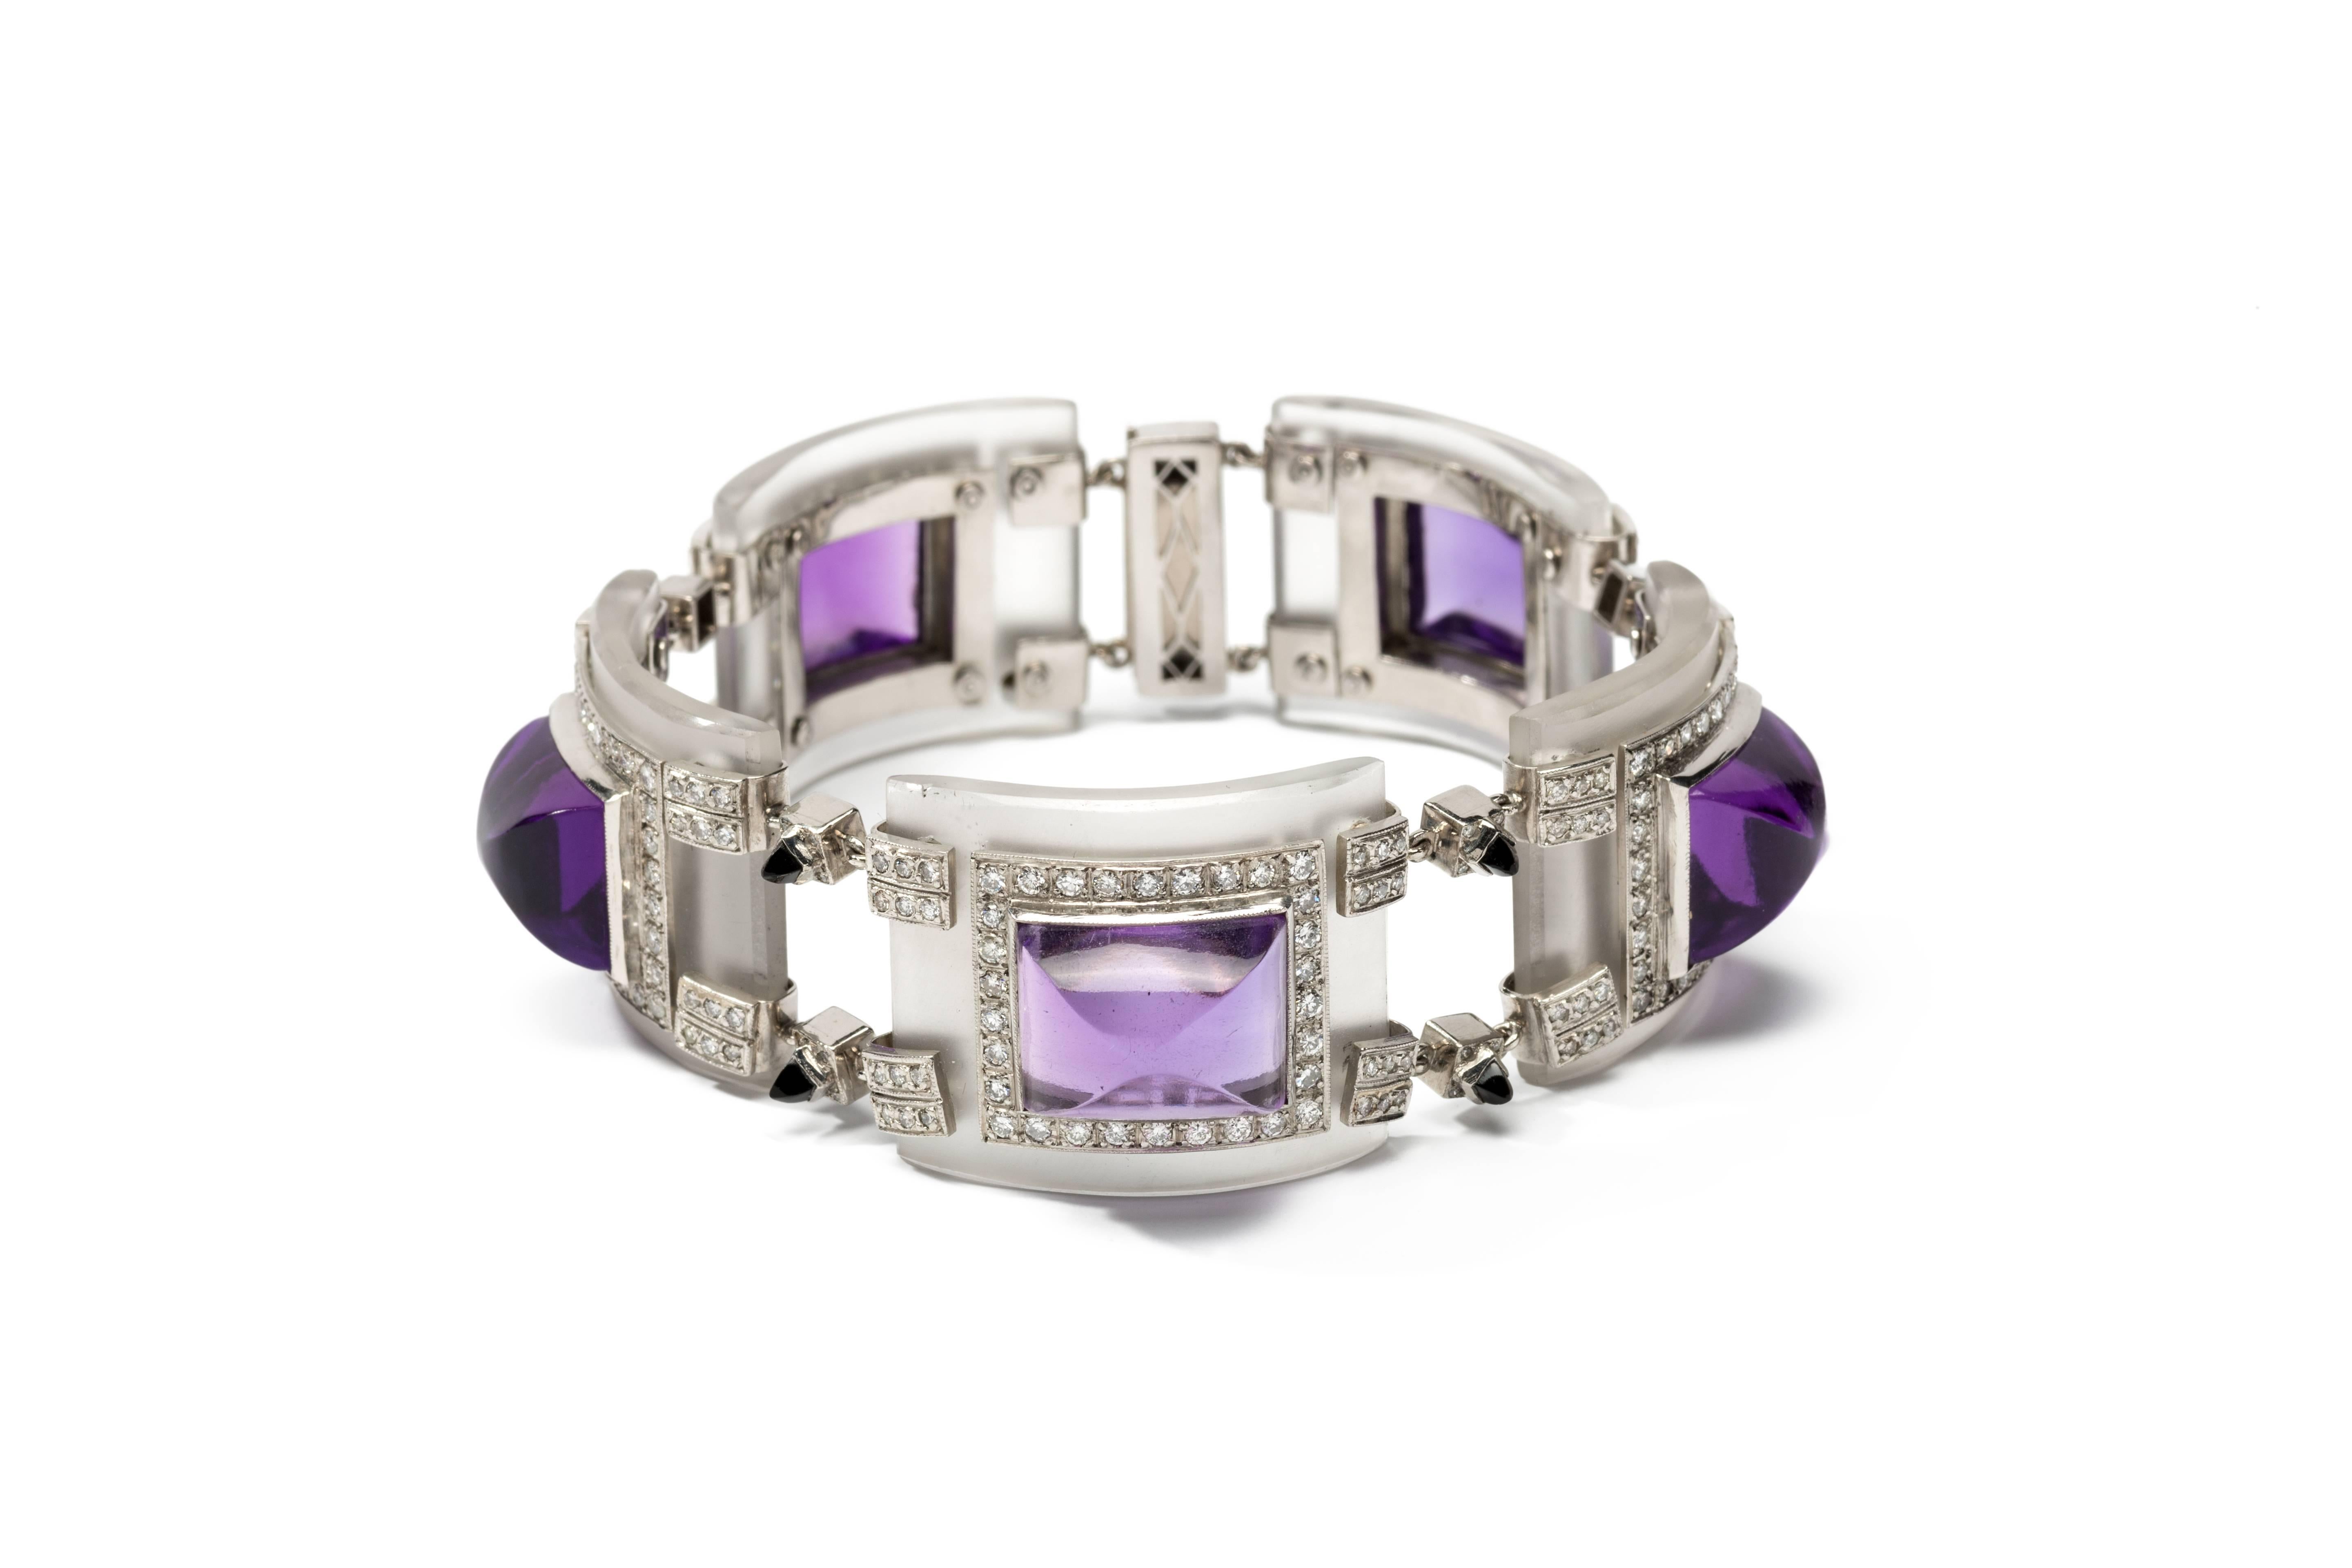 Argentina, about 1975. Set with 5 large sugarloaf- cut amethyst on rock crystal boards, accented by 364 brilliant-cut diamonds weighing approximately 5,60 ct. and 10 onyx. Mounted in platinum. Total weight: 84,20 grams. 
Length: 7.95 in ( 20,2 cm ),